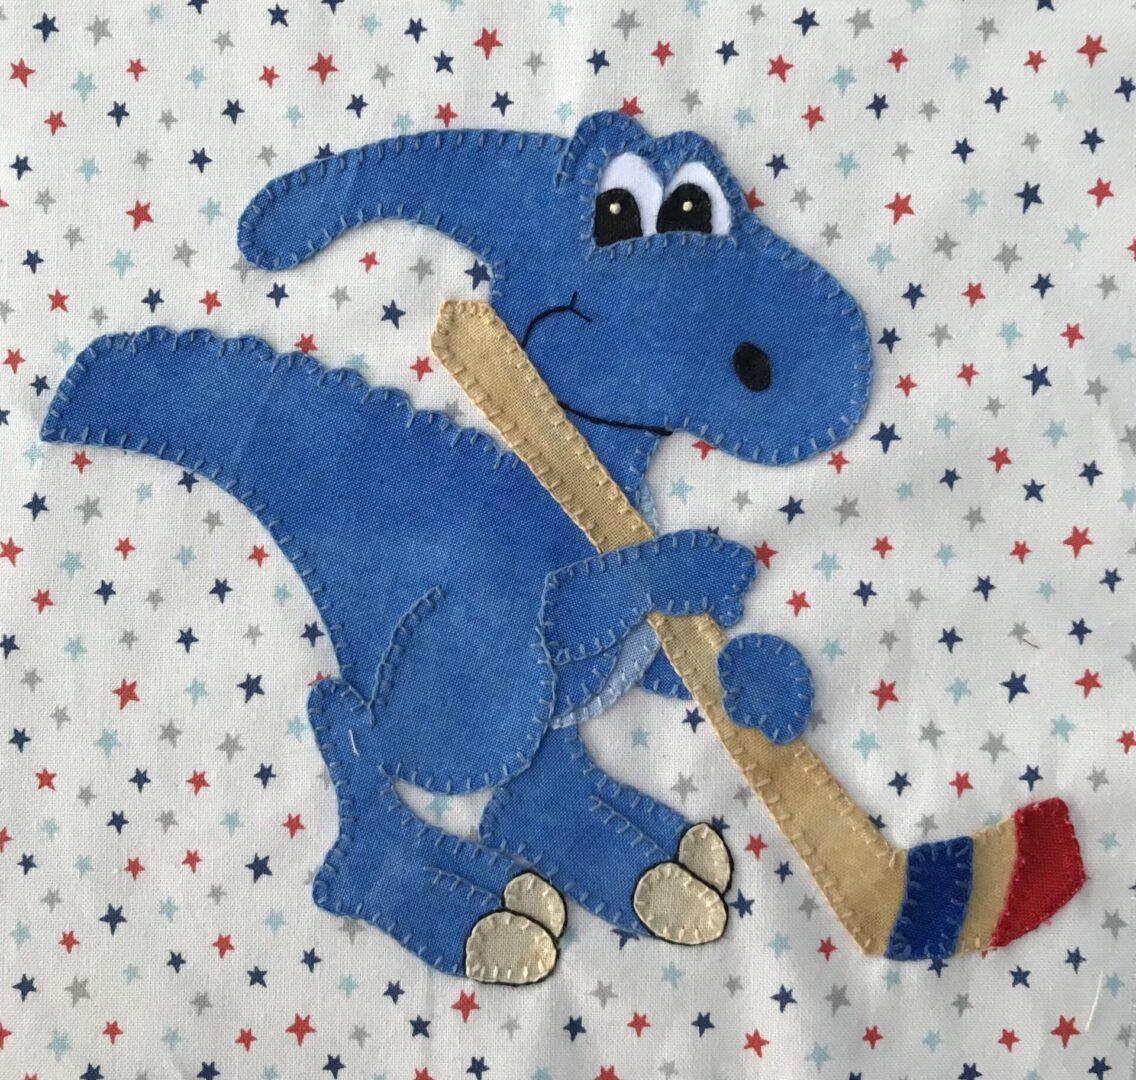 A blue dinosaur holding a stick in its mouth.